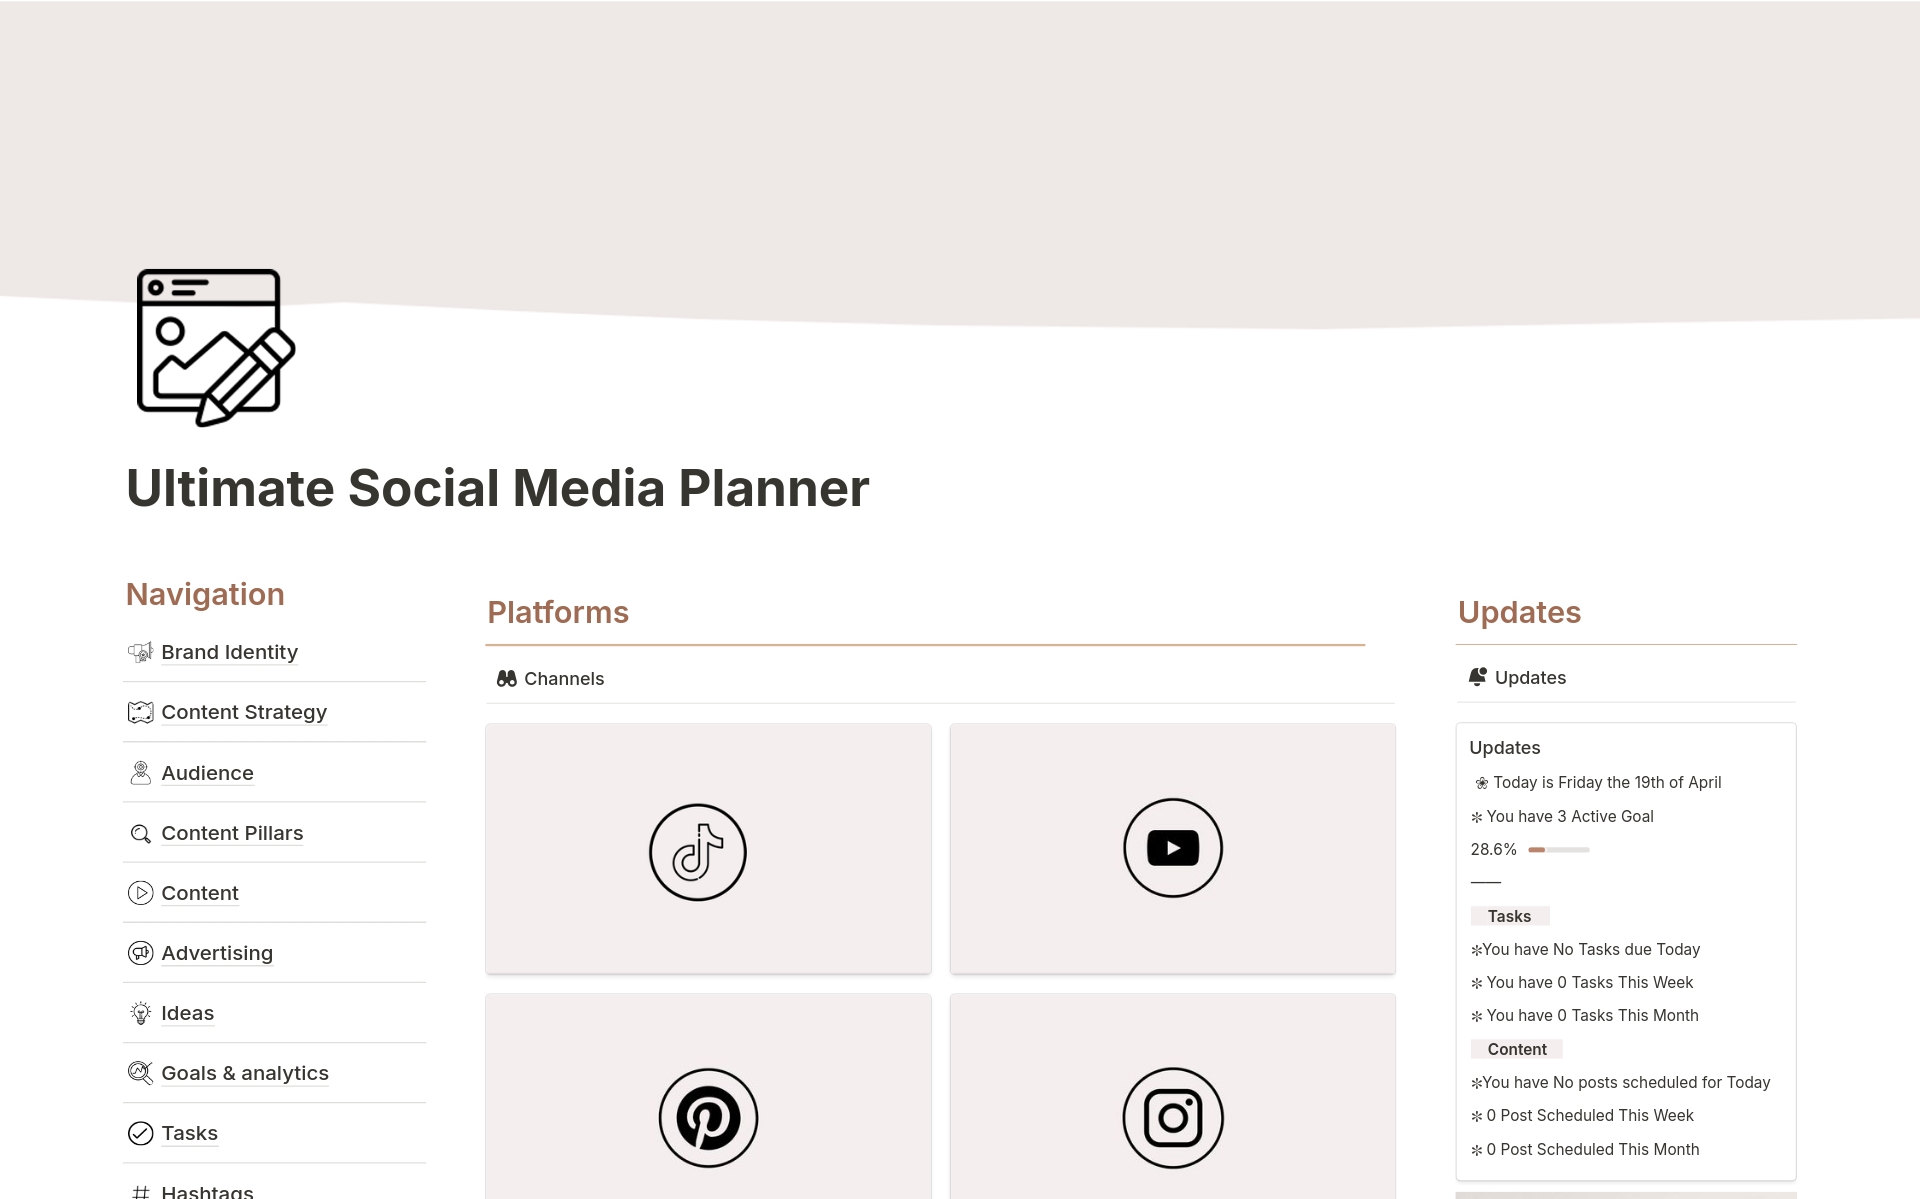 A template preview for Social Media Content Planner